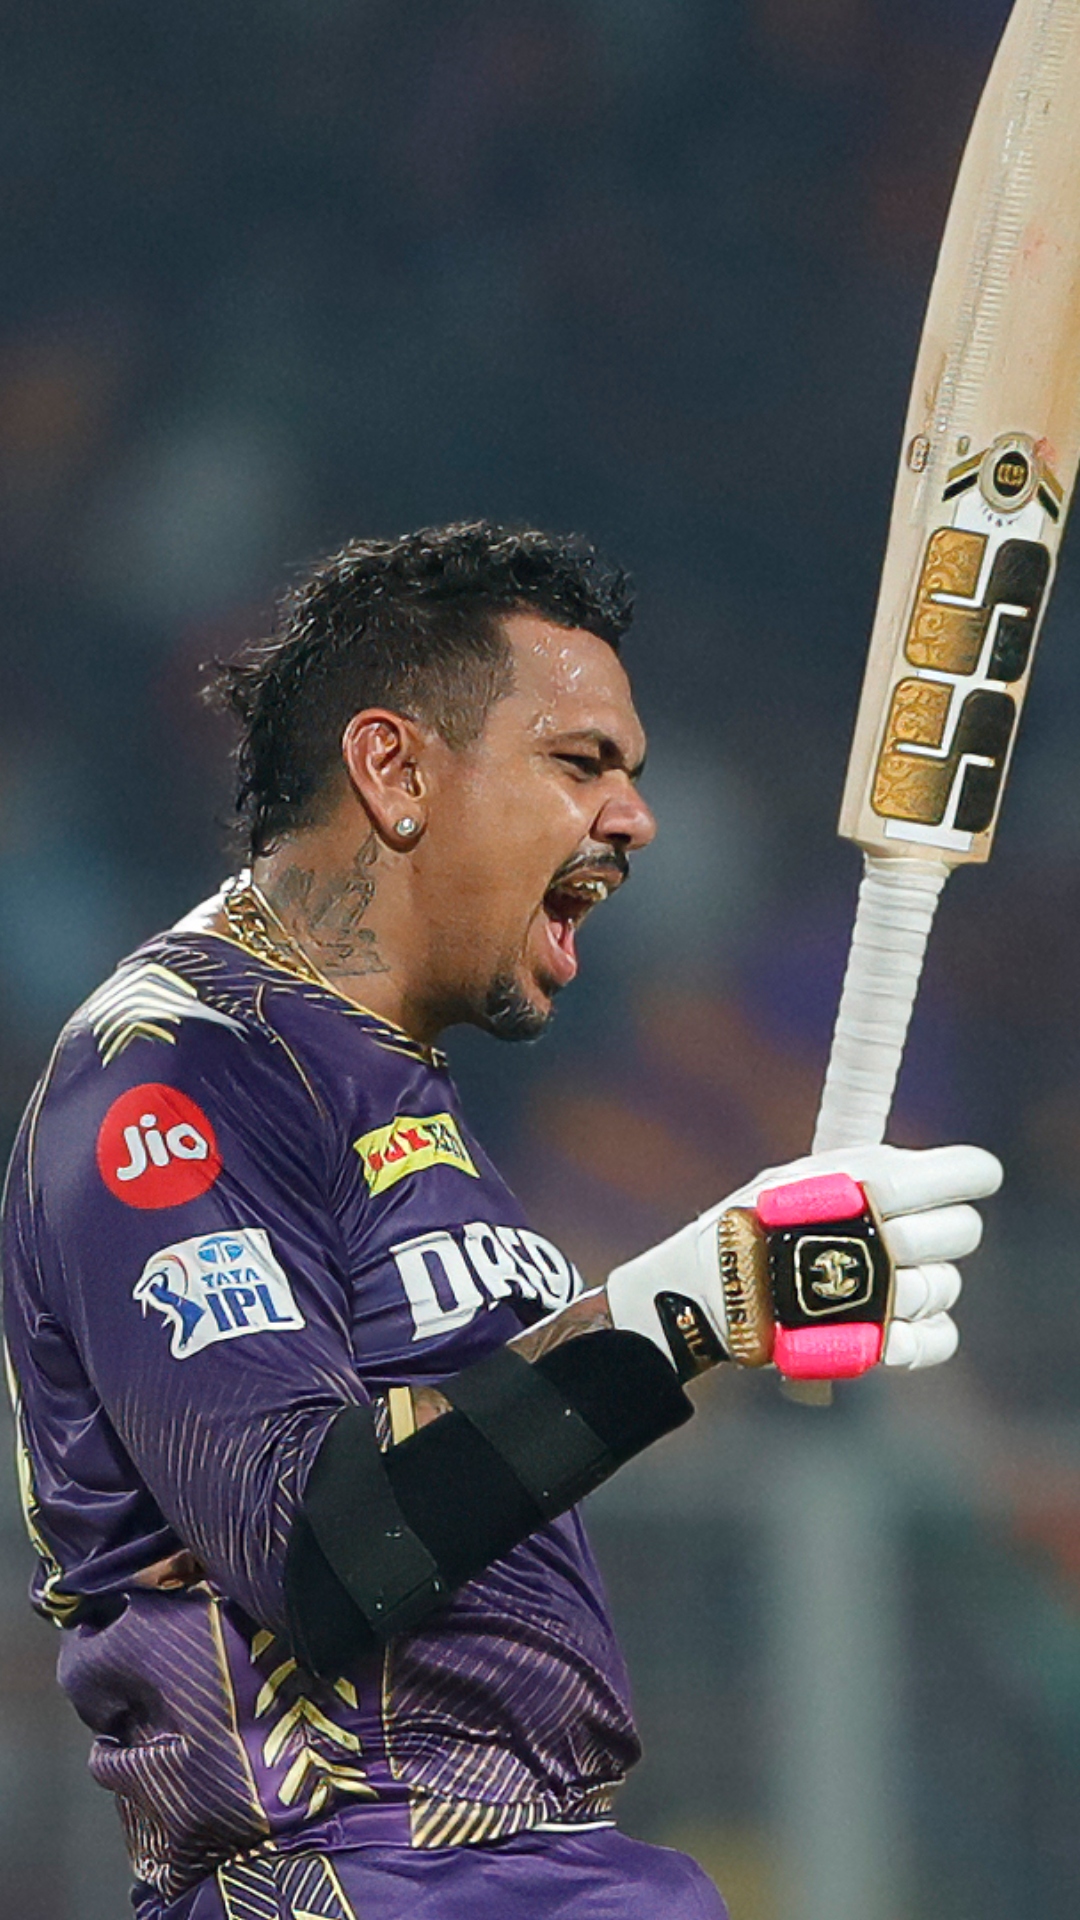 Players to hit a century and take 200 wickets in T20 cricket, Sunil Narine joins&nbsp;elite&nbsp;list